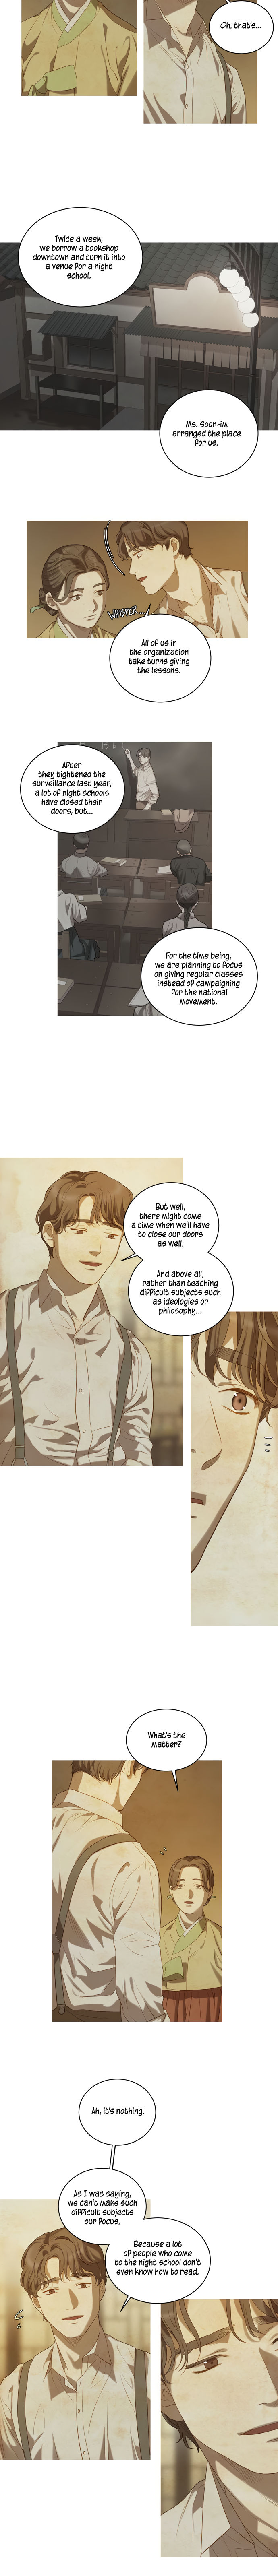 Gorae Byul - The Gyeongseong Mermaid - Chapter 14 Page 11